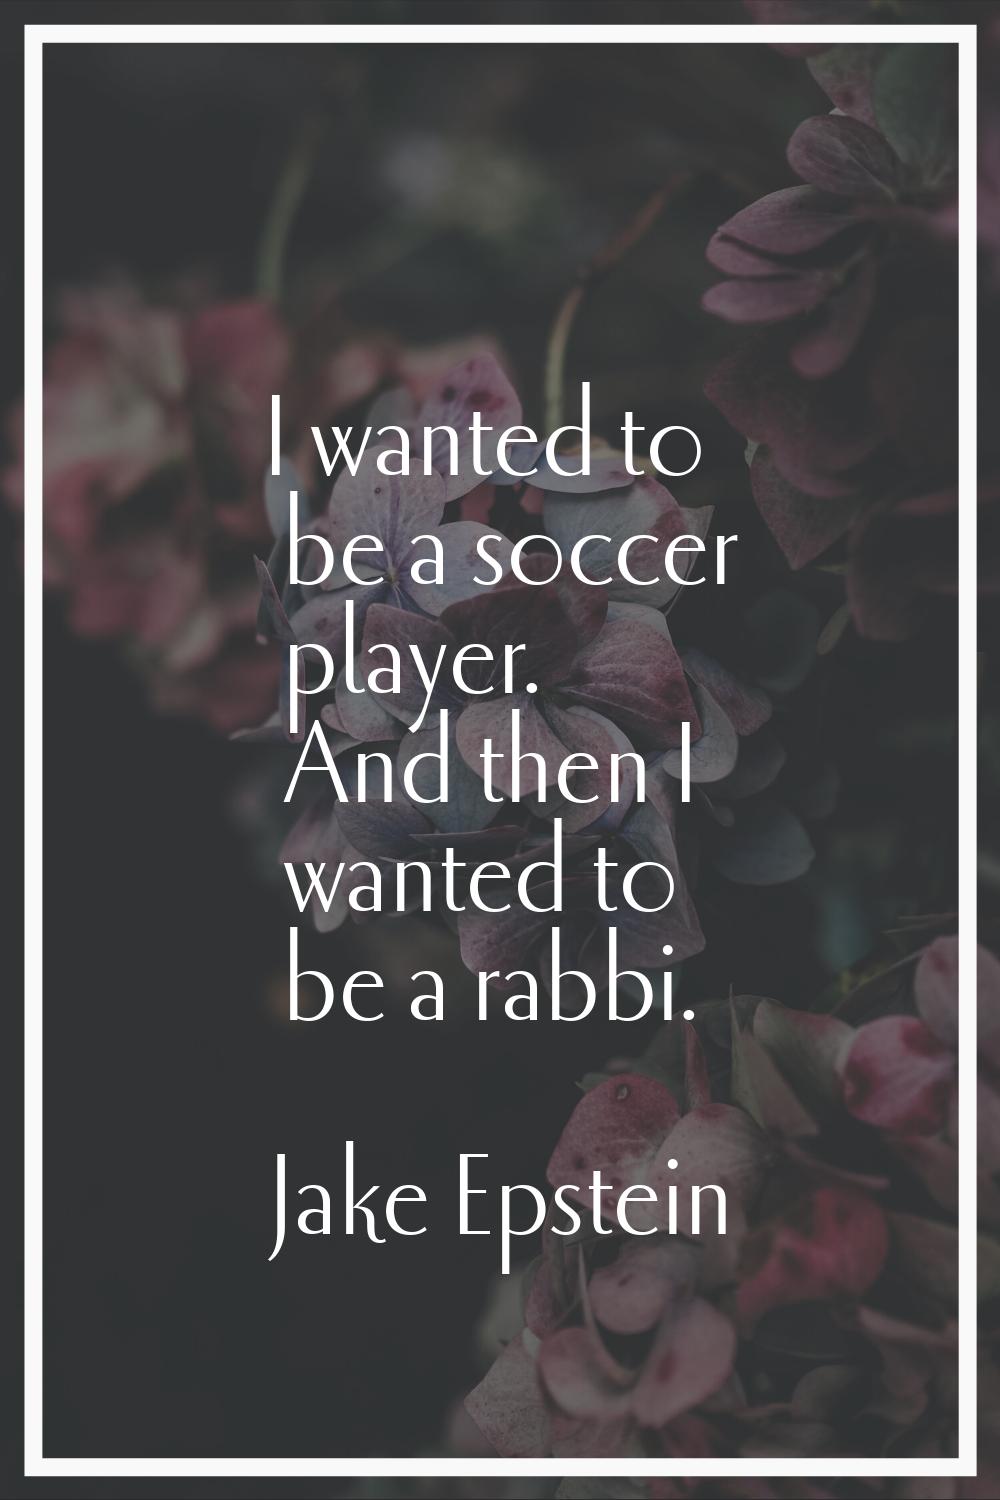 I wanted to be a soccer player. And then I wanted to be a rabbi.